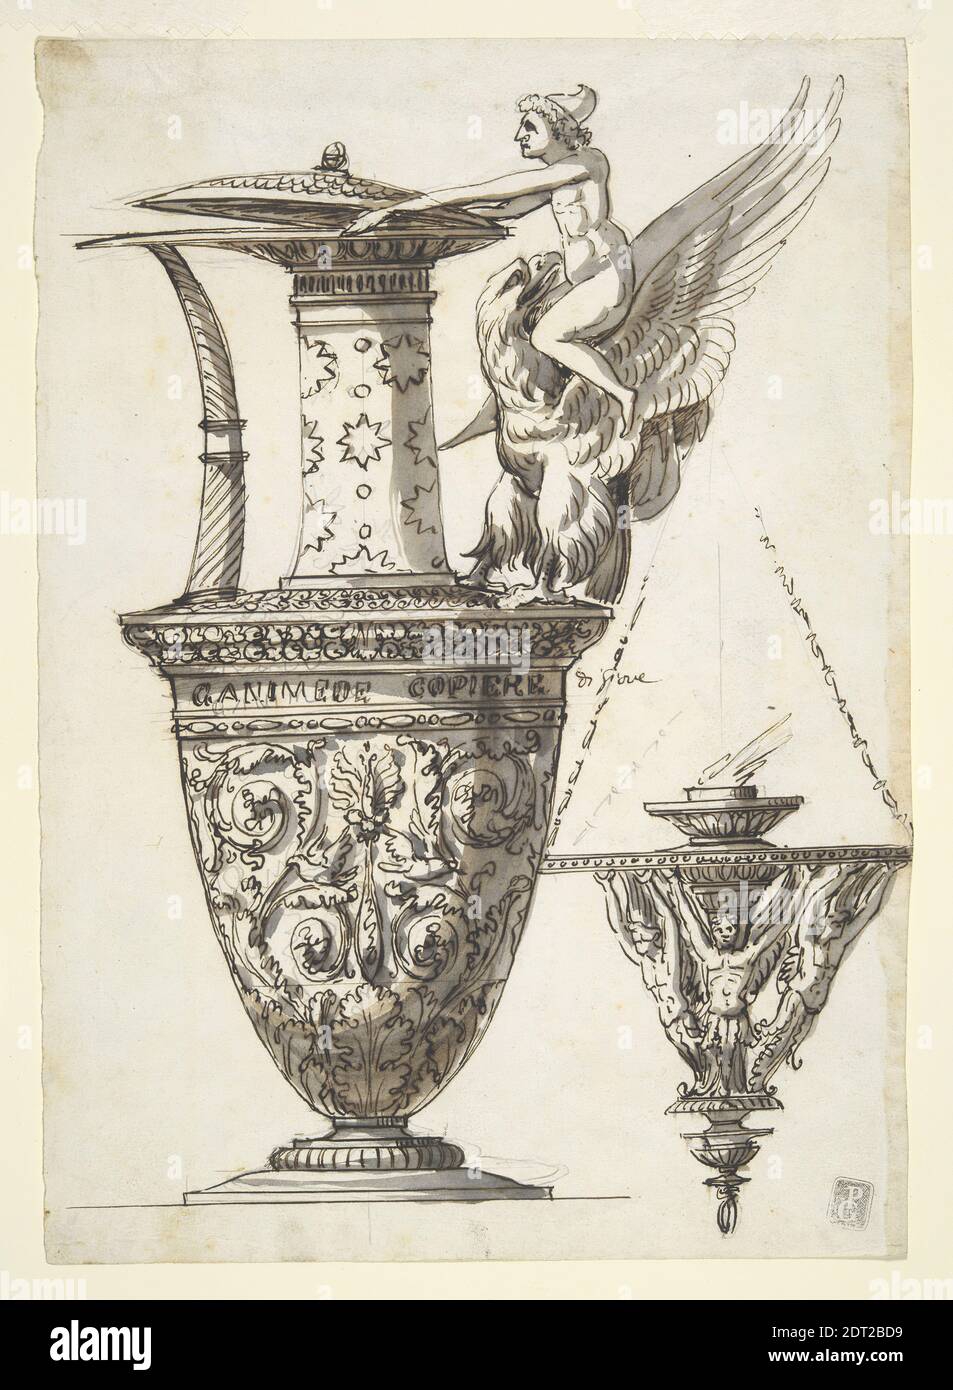 Artist: Antonio Basoli, Italian, 1774–1843, Design for an Elaborate Pitcher and Chandelier, ca. 1800, Pen and brown ink over graphite, with grey wash, 26.8 × 18.9 cm (10 9/16 × 7 7/16 in.), Italian, 19th century, Works on Paper - Drawings and Watercolors Stock Photo